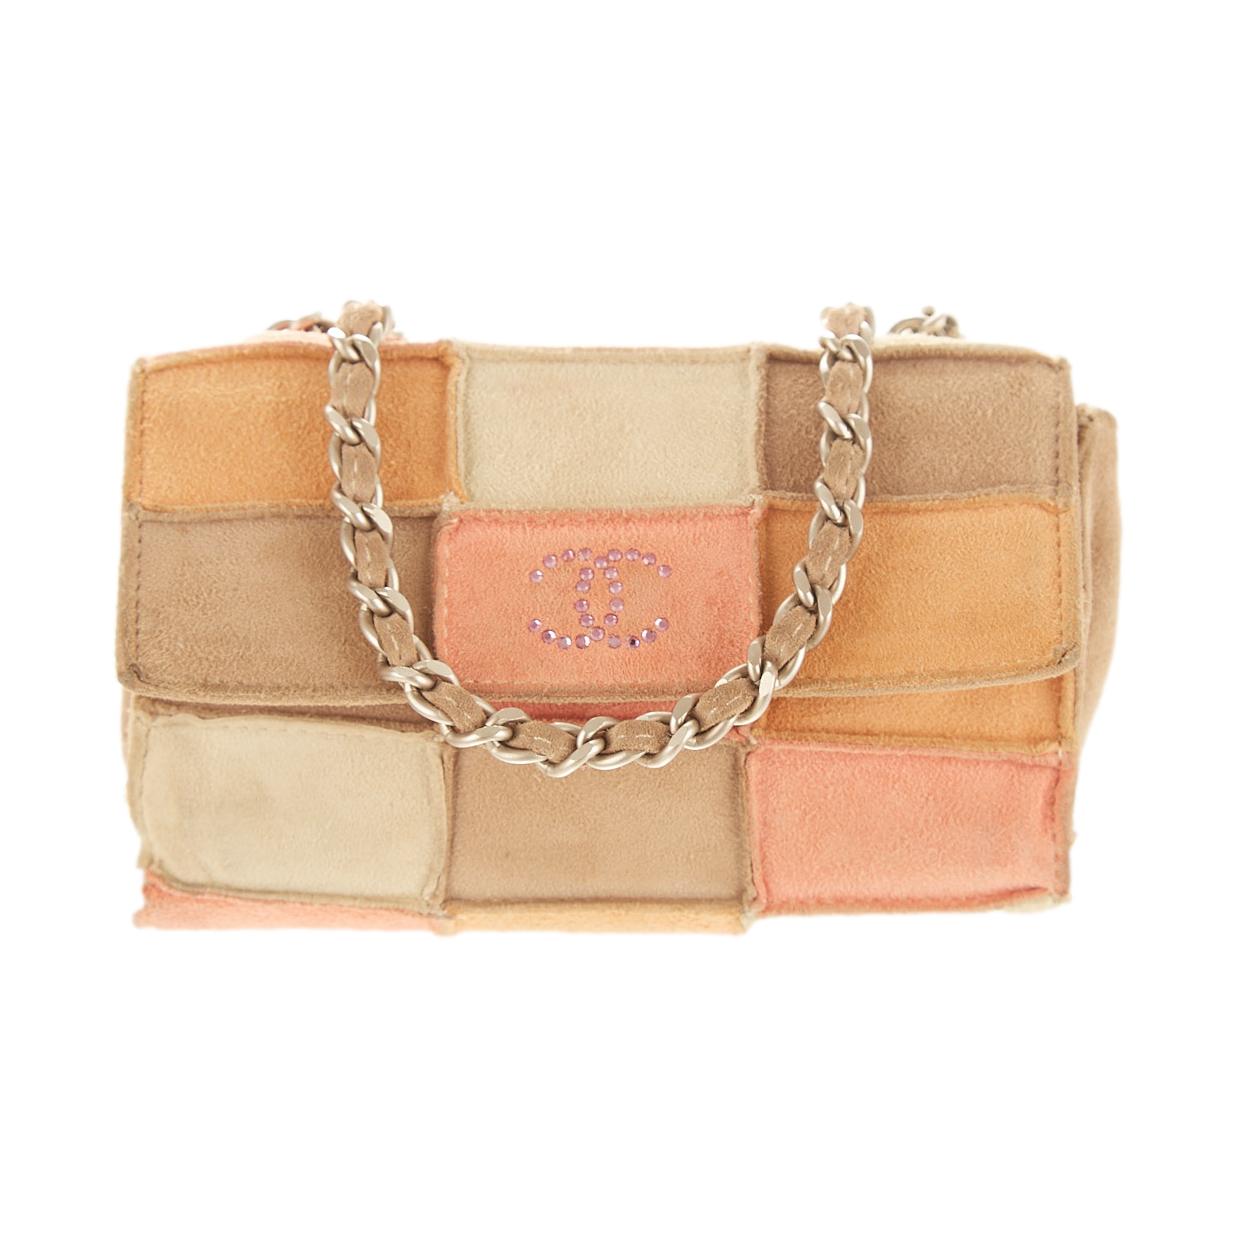 Chanel Micro Suede Patchwork Chain Bag